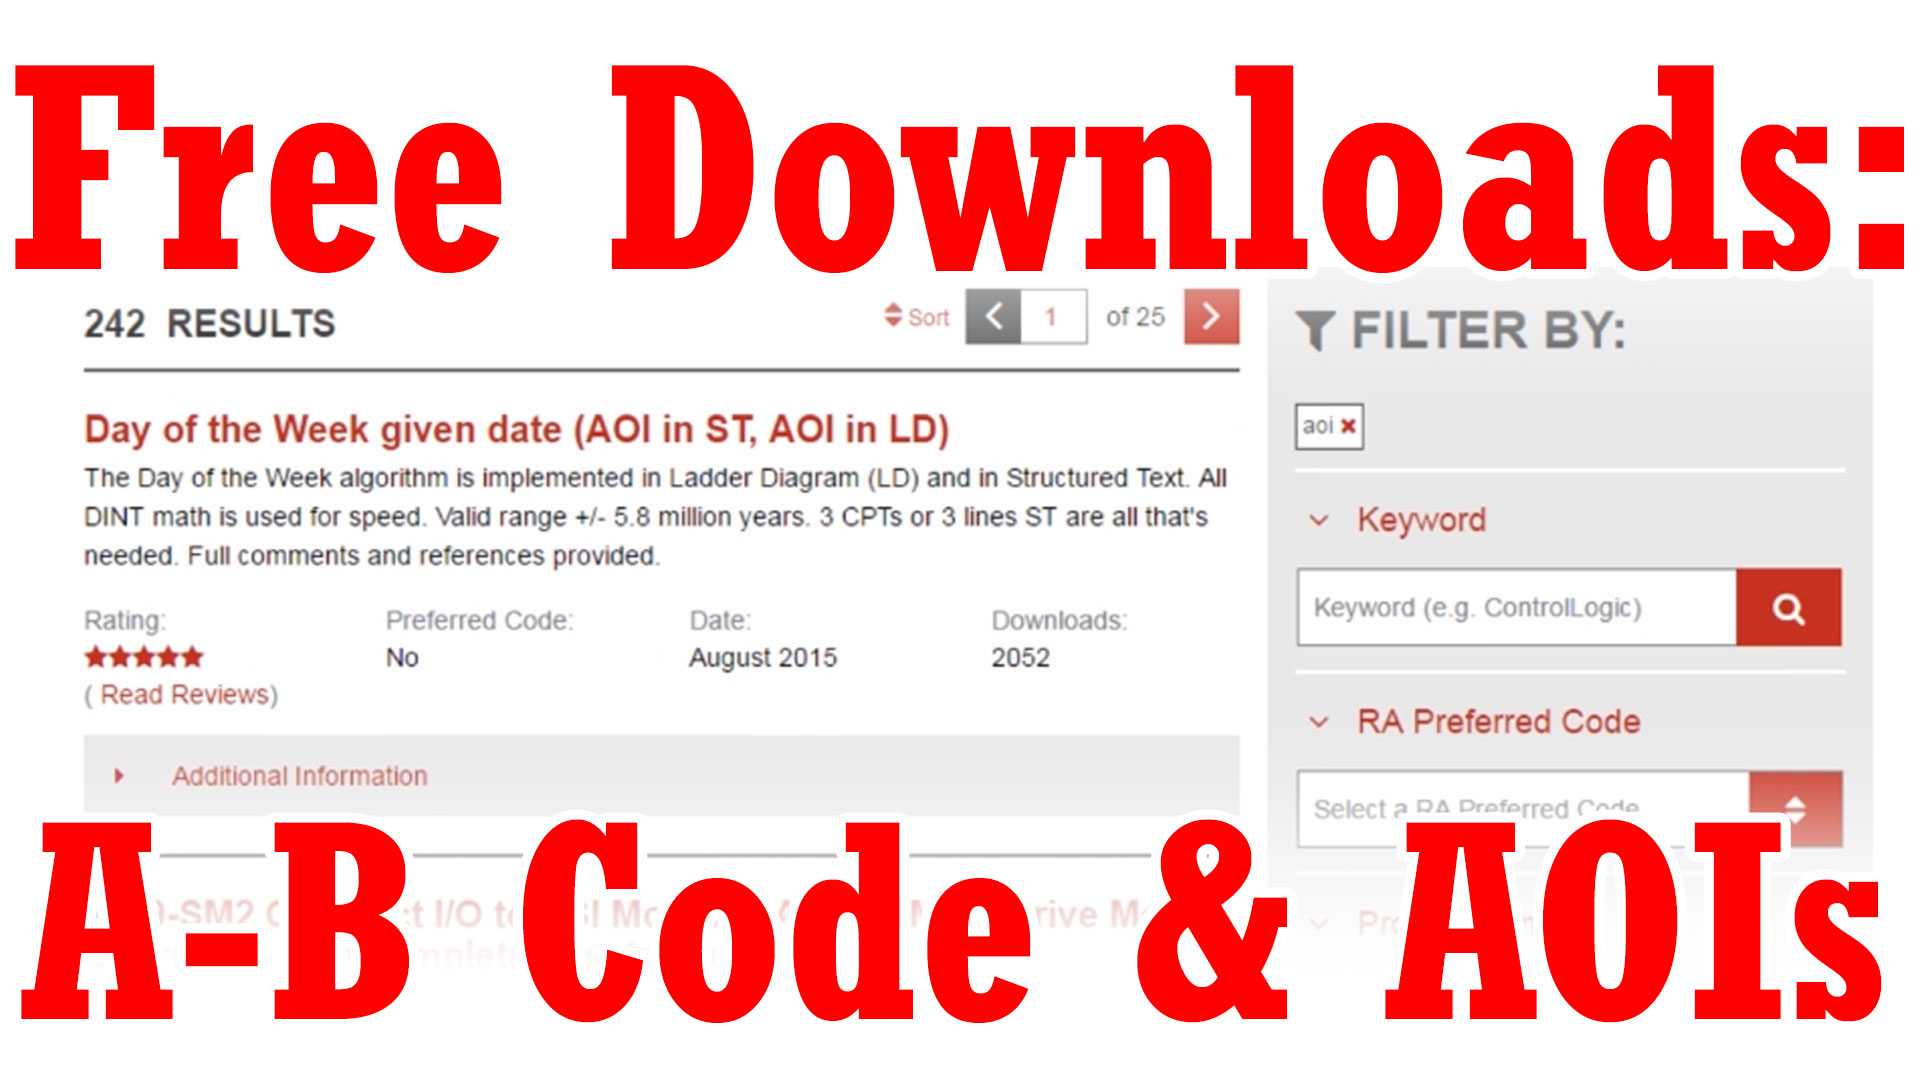 Sample Code - How to download free A-B Sample Programs and AOIs (M3E07)